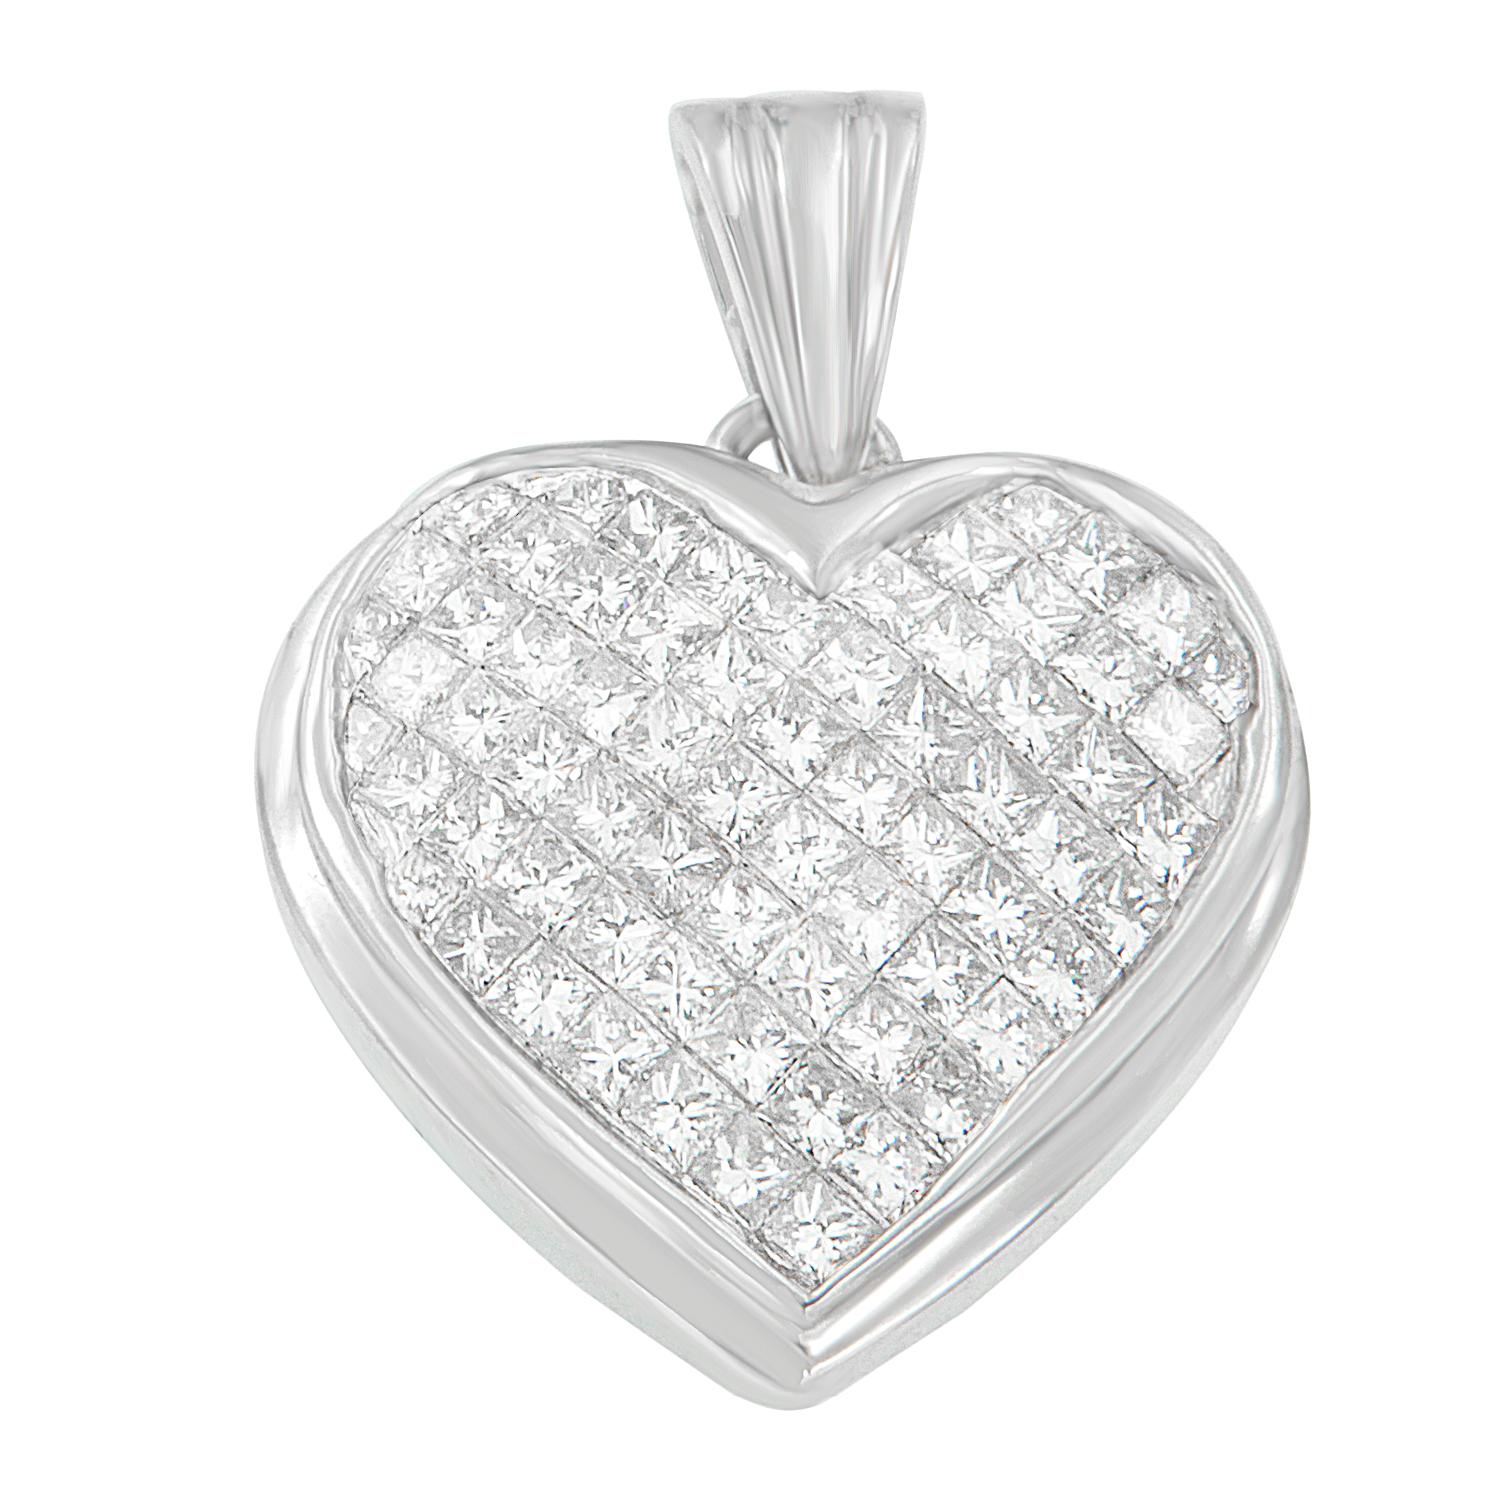 A classic for the ages, this heart pendant features over 60 princess-cut beautifully diamonds set in high quality 14k white gold. It is a gift she'll be sure to love. Ready to wear out of the box, it comes with a standard size 18 chain. This